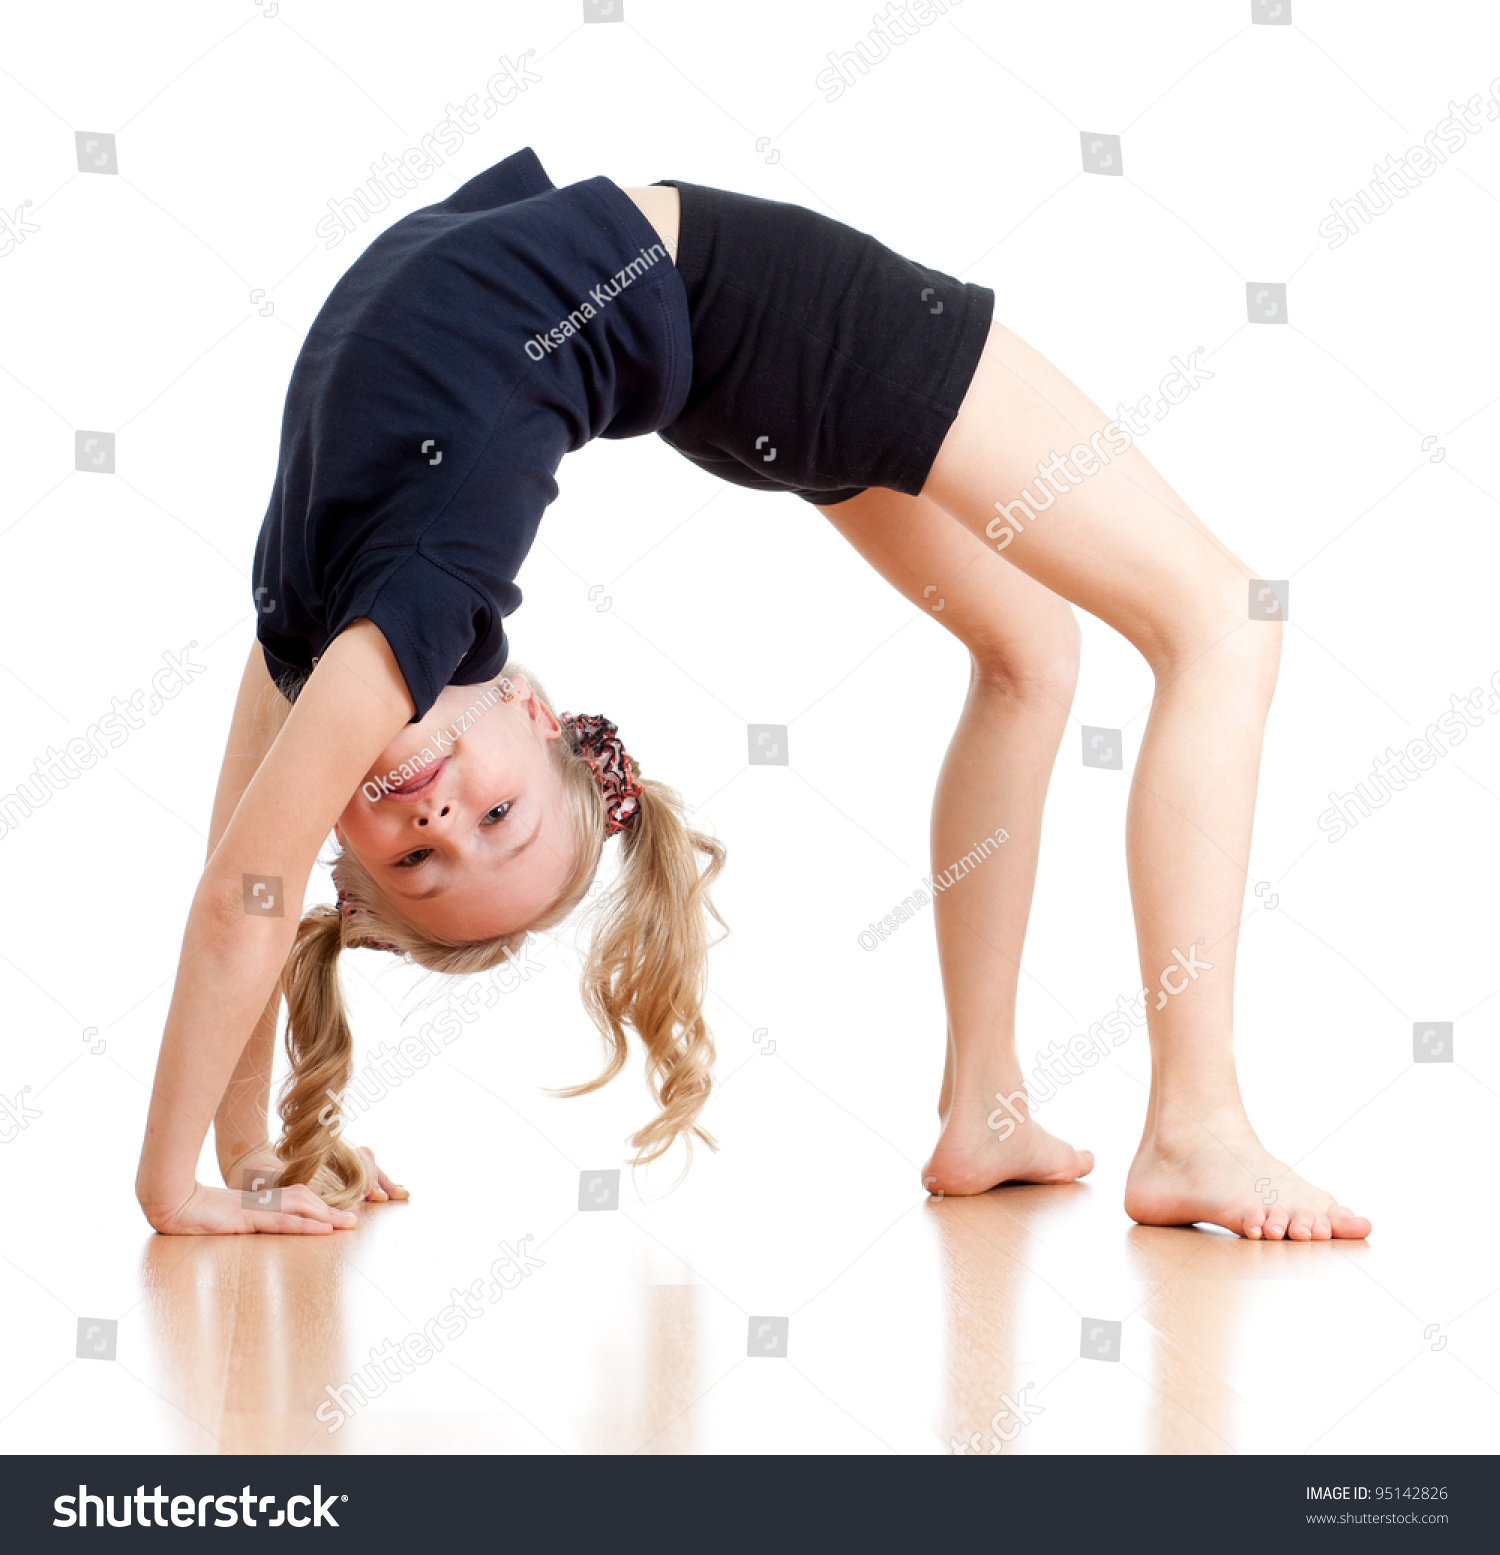 Young Girl Doing Gymnastics Over White Stock Photo 95142826 - Shutterstock